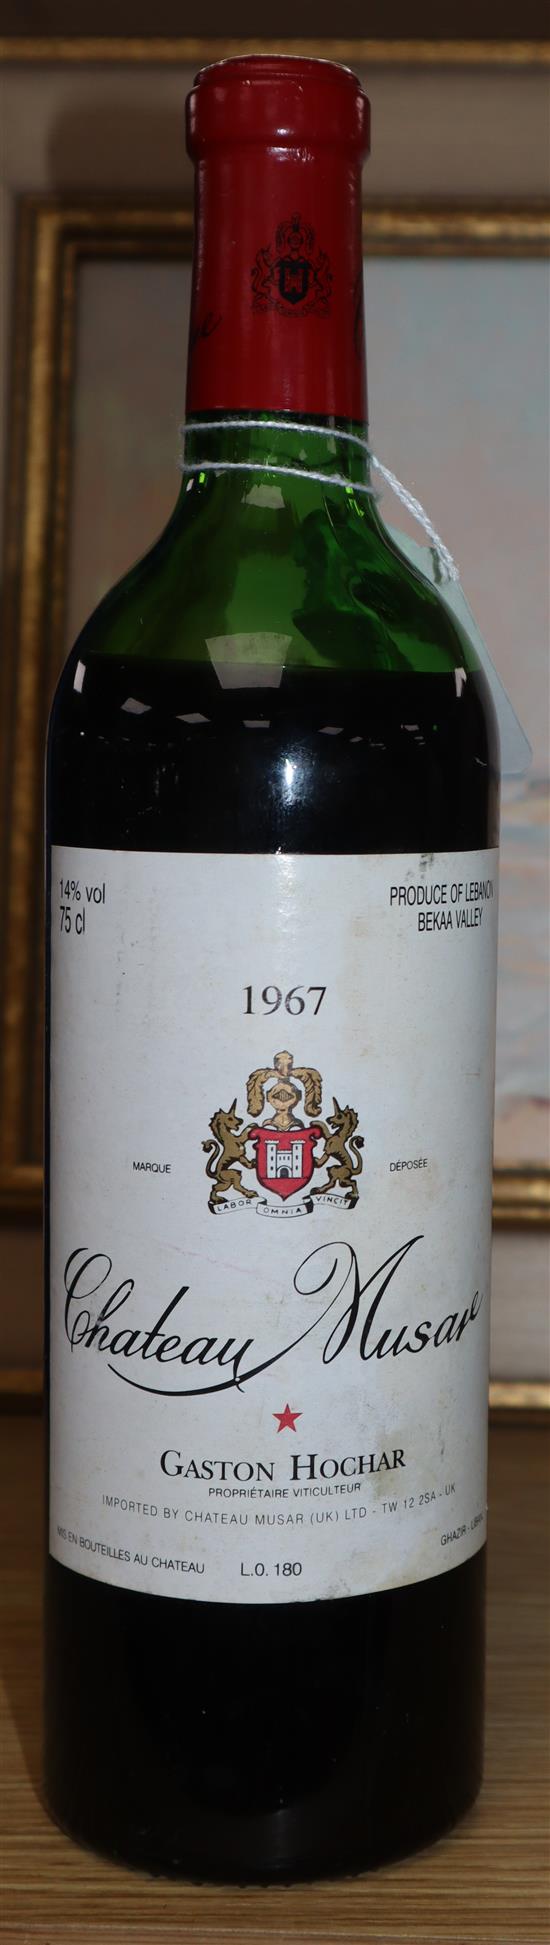 One bottle of Chateau Musar, 1967